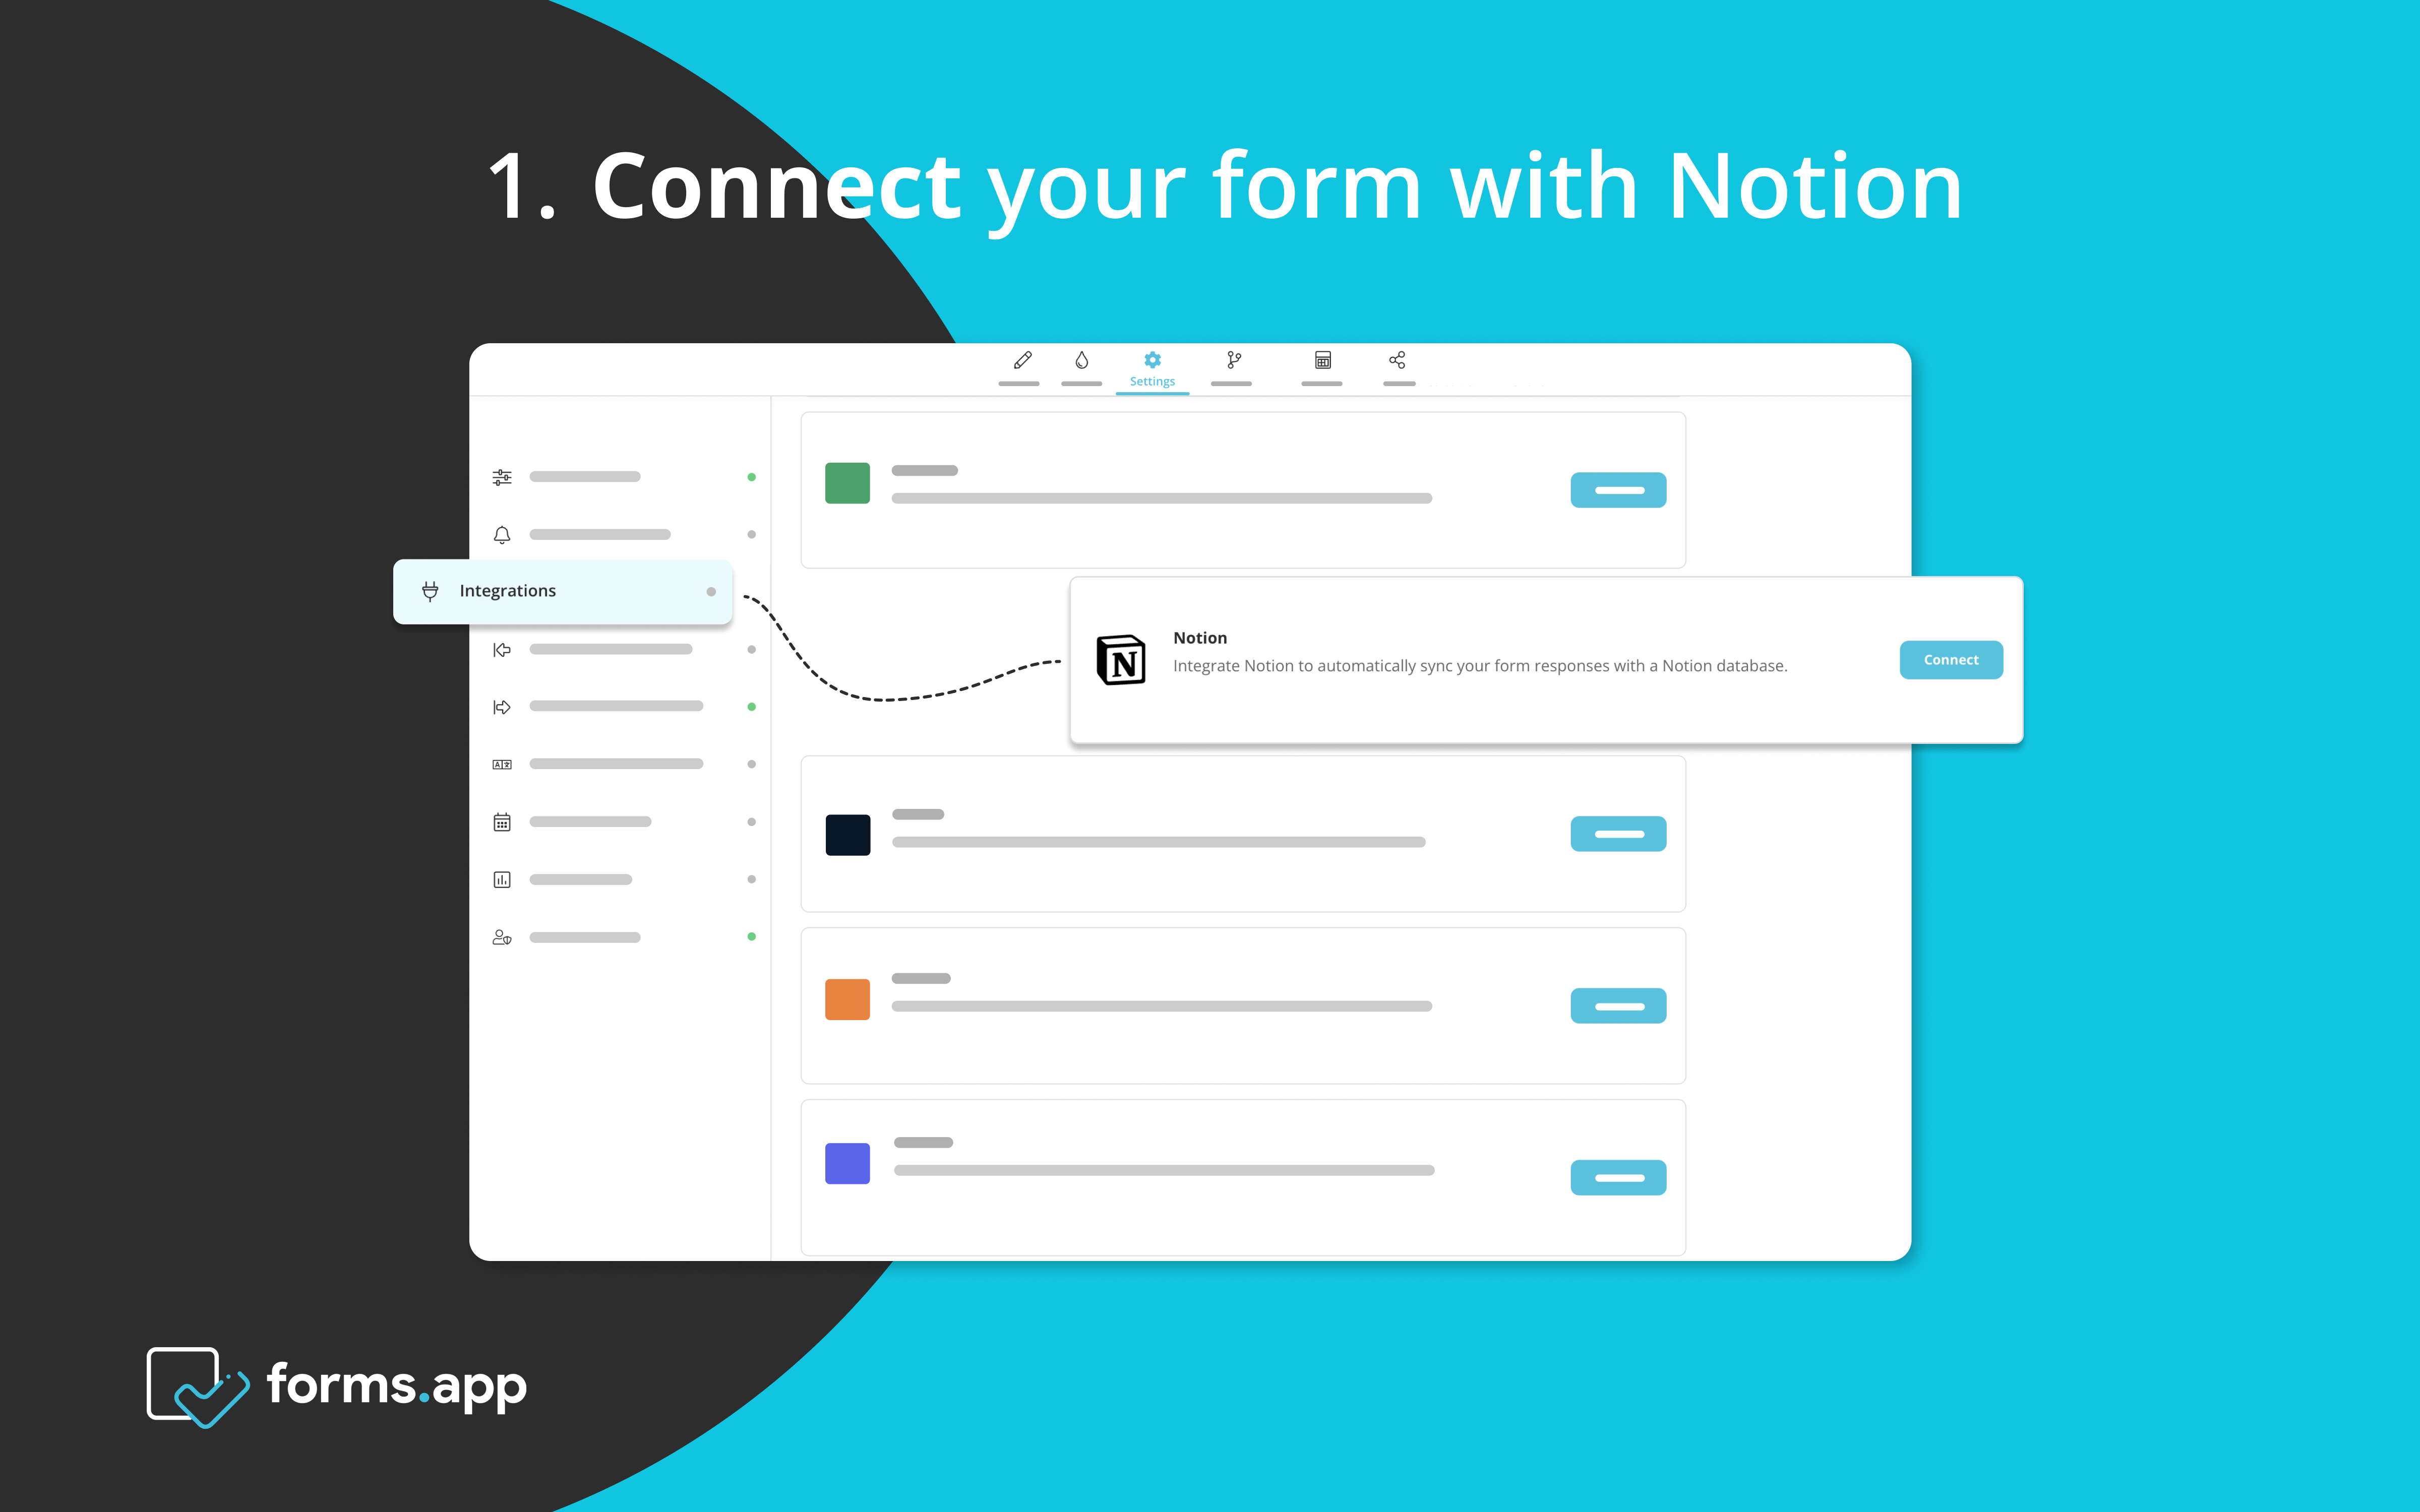 How to How to integrate Typeform in Notion (free, step-by-step)